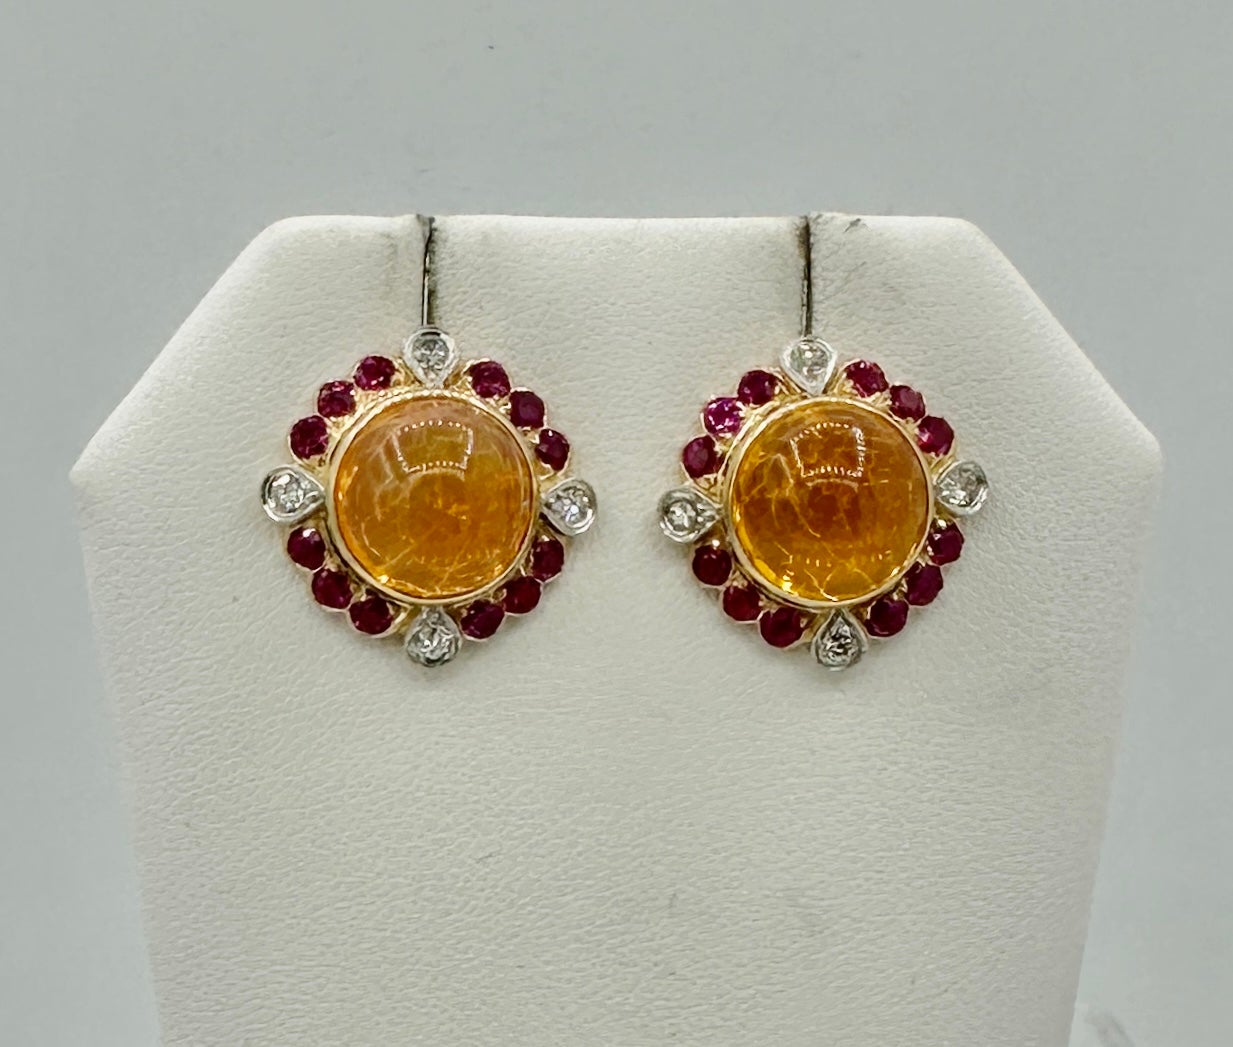 This is a spectacular pair of antique Retro - Art Deco 11 Carat Mexican Fire Opal, Ruby and Diamond Earrings in 14 Karat Gold.  The sparkling round Mexican Fire Opals are each approximately 5.75 Carats for a total weight of approximately 11 Carats. 